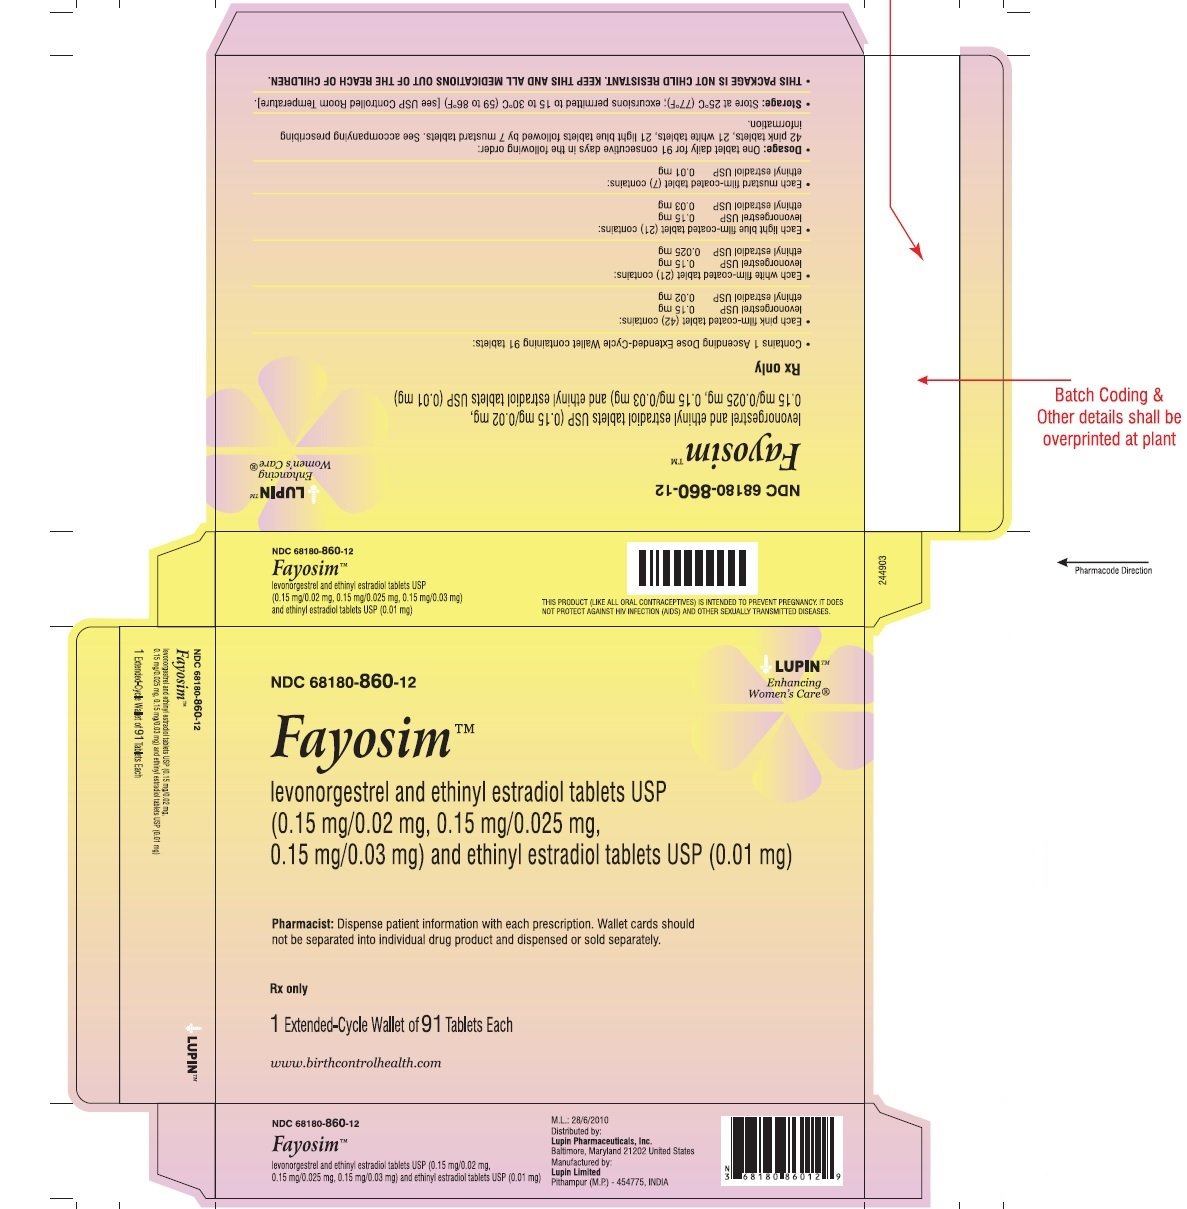 Levonorgestrel and Ethinyl Estradiol Tablets USP, 0.15 mg/0.02 mg, 0.15 mg/0.025 mg, 0.15 mg/0.03 mg and Ethinyl Estradiol Tablets 0.01 mg
							1 extended cycle wallet of 91 tablets in a carton